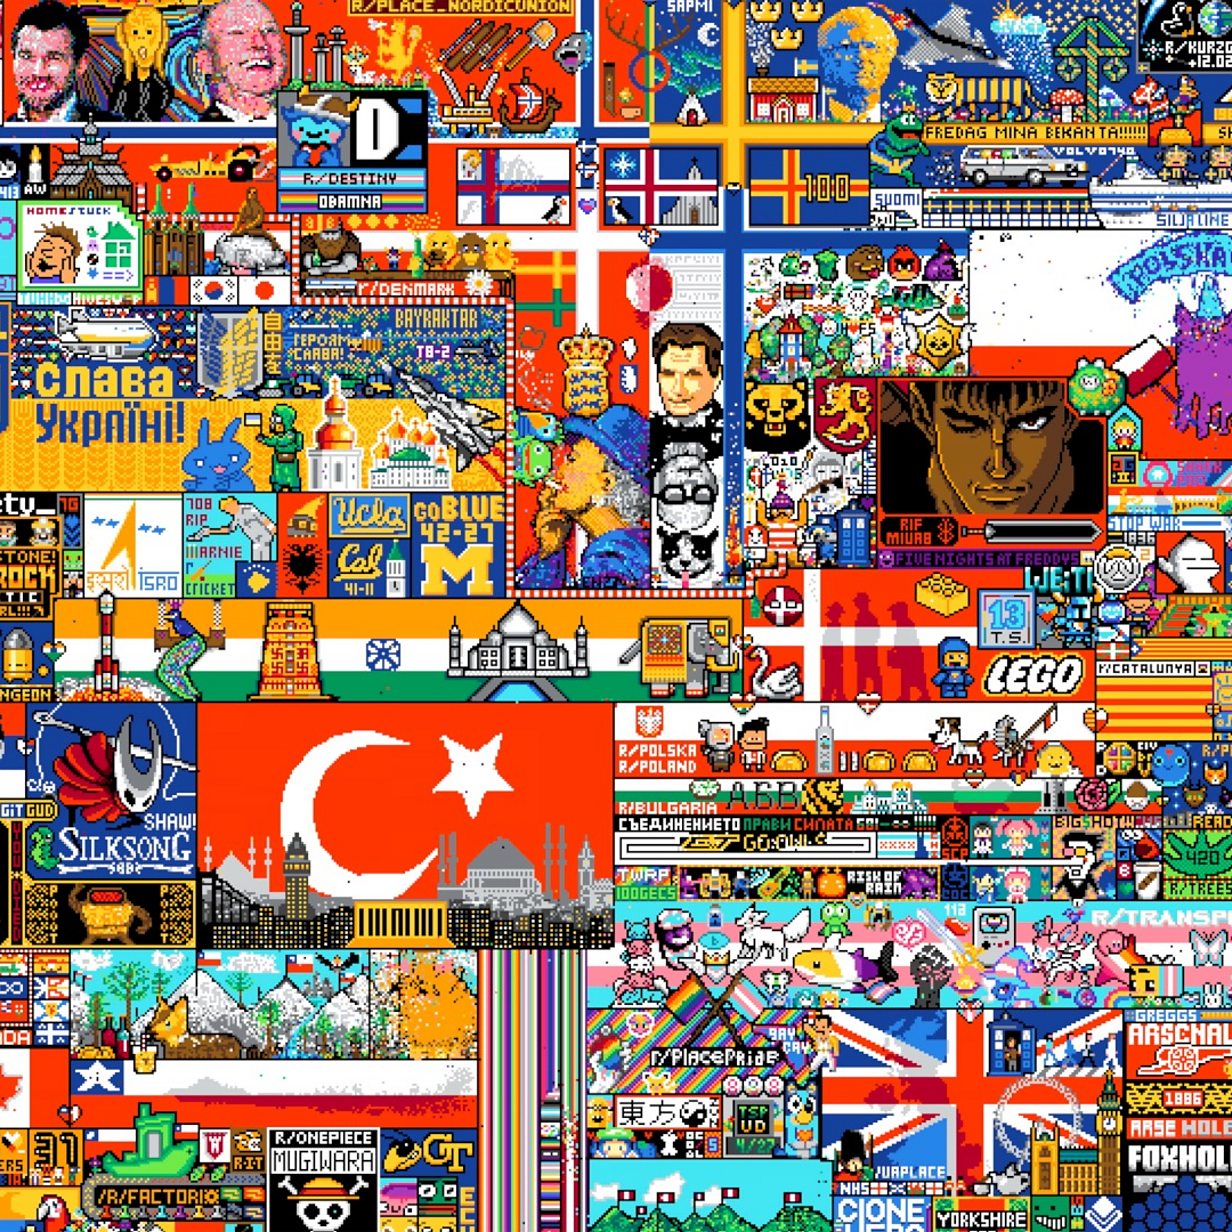 Reddit r/Place Welsh flag appears in artwork drawn by millions